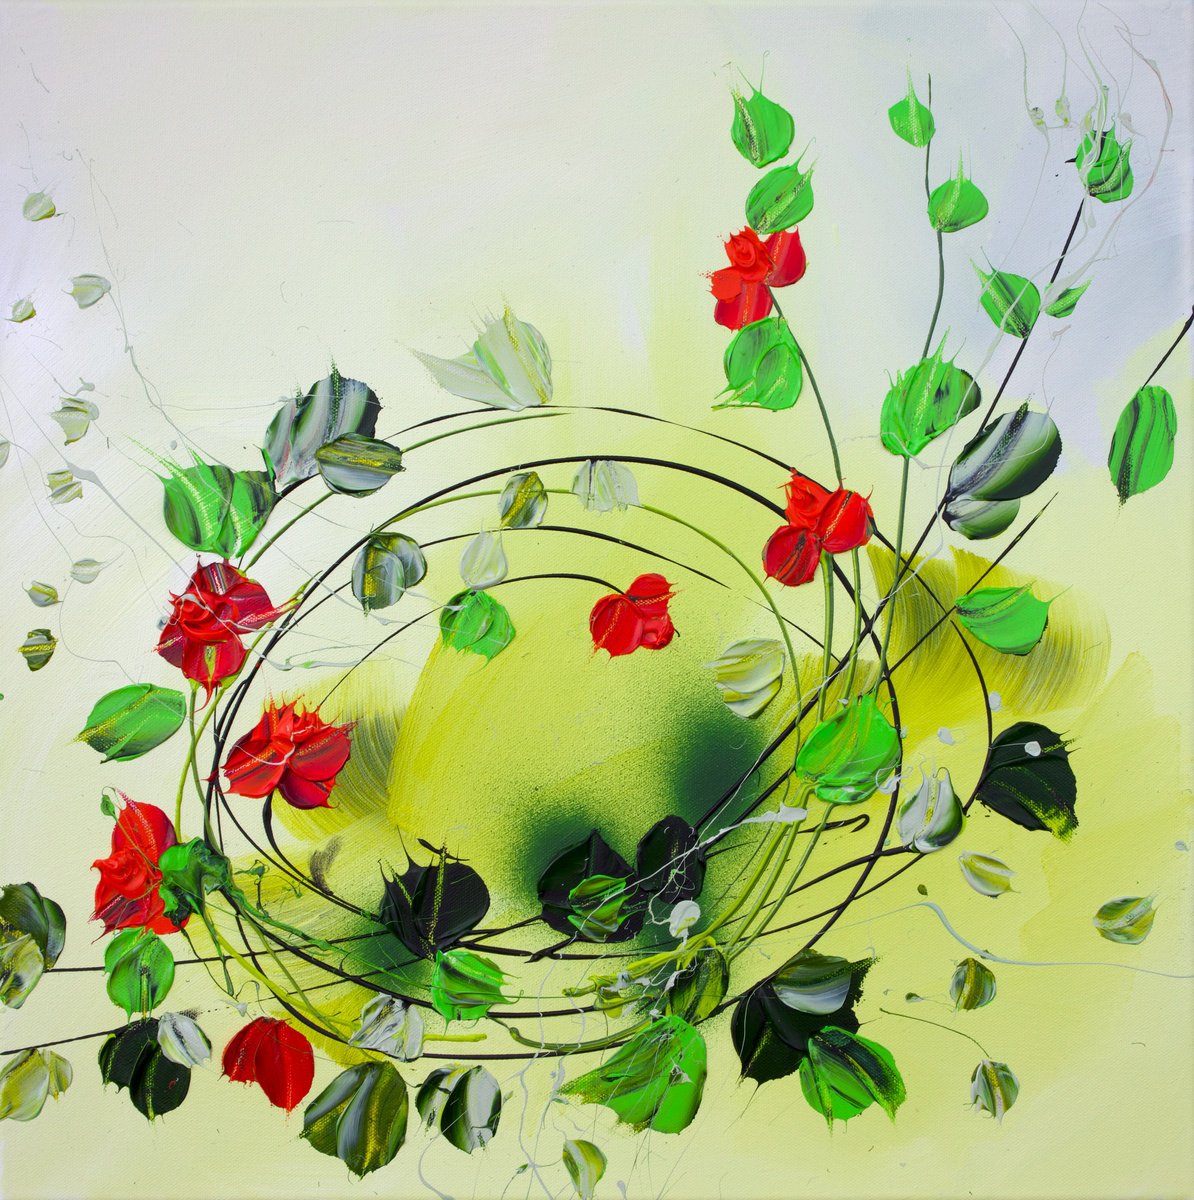 Swirling Flowers #2" acrylic square artwork with roses 50x50cm by Anastassia Skopp